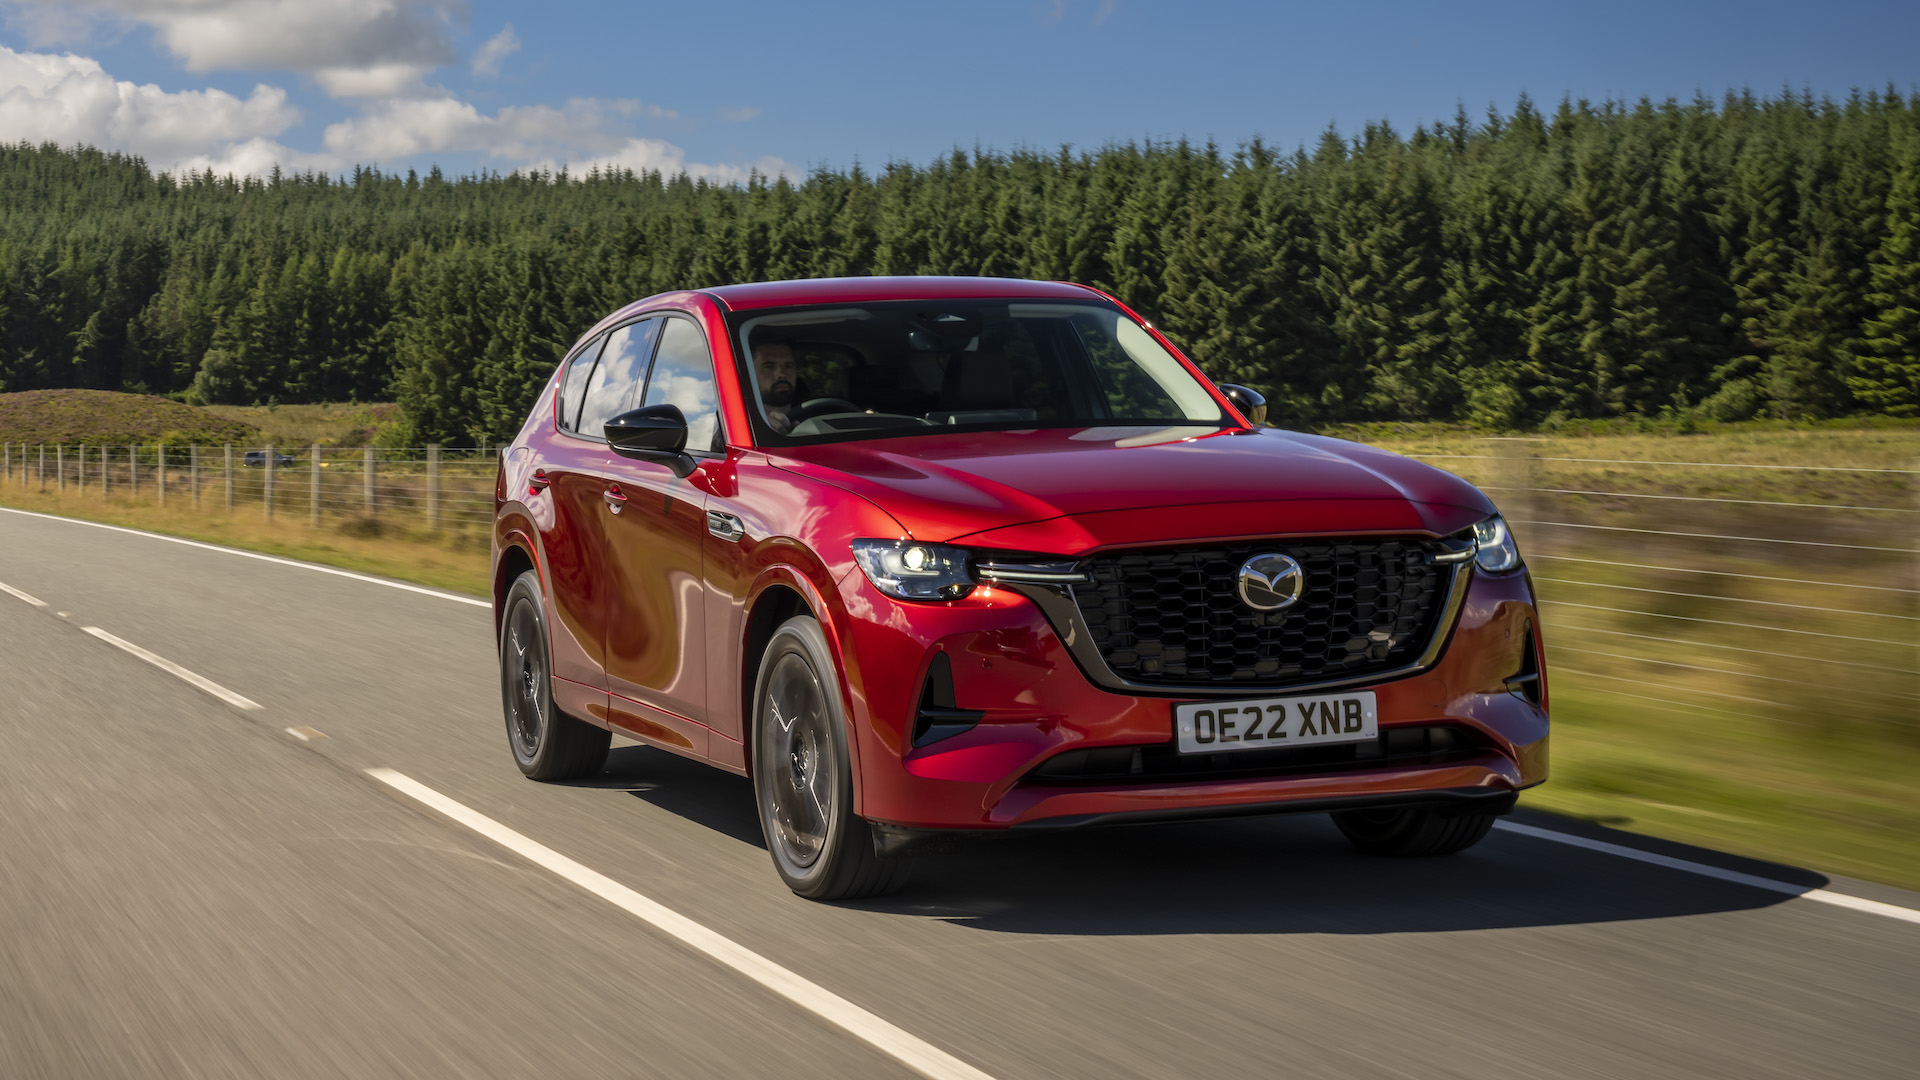 Mazda CX-3 review: Small SUV sacrifices practicality